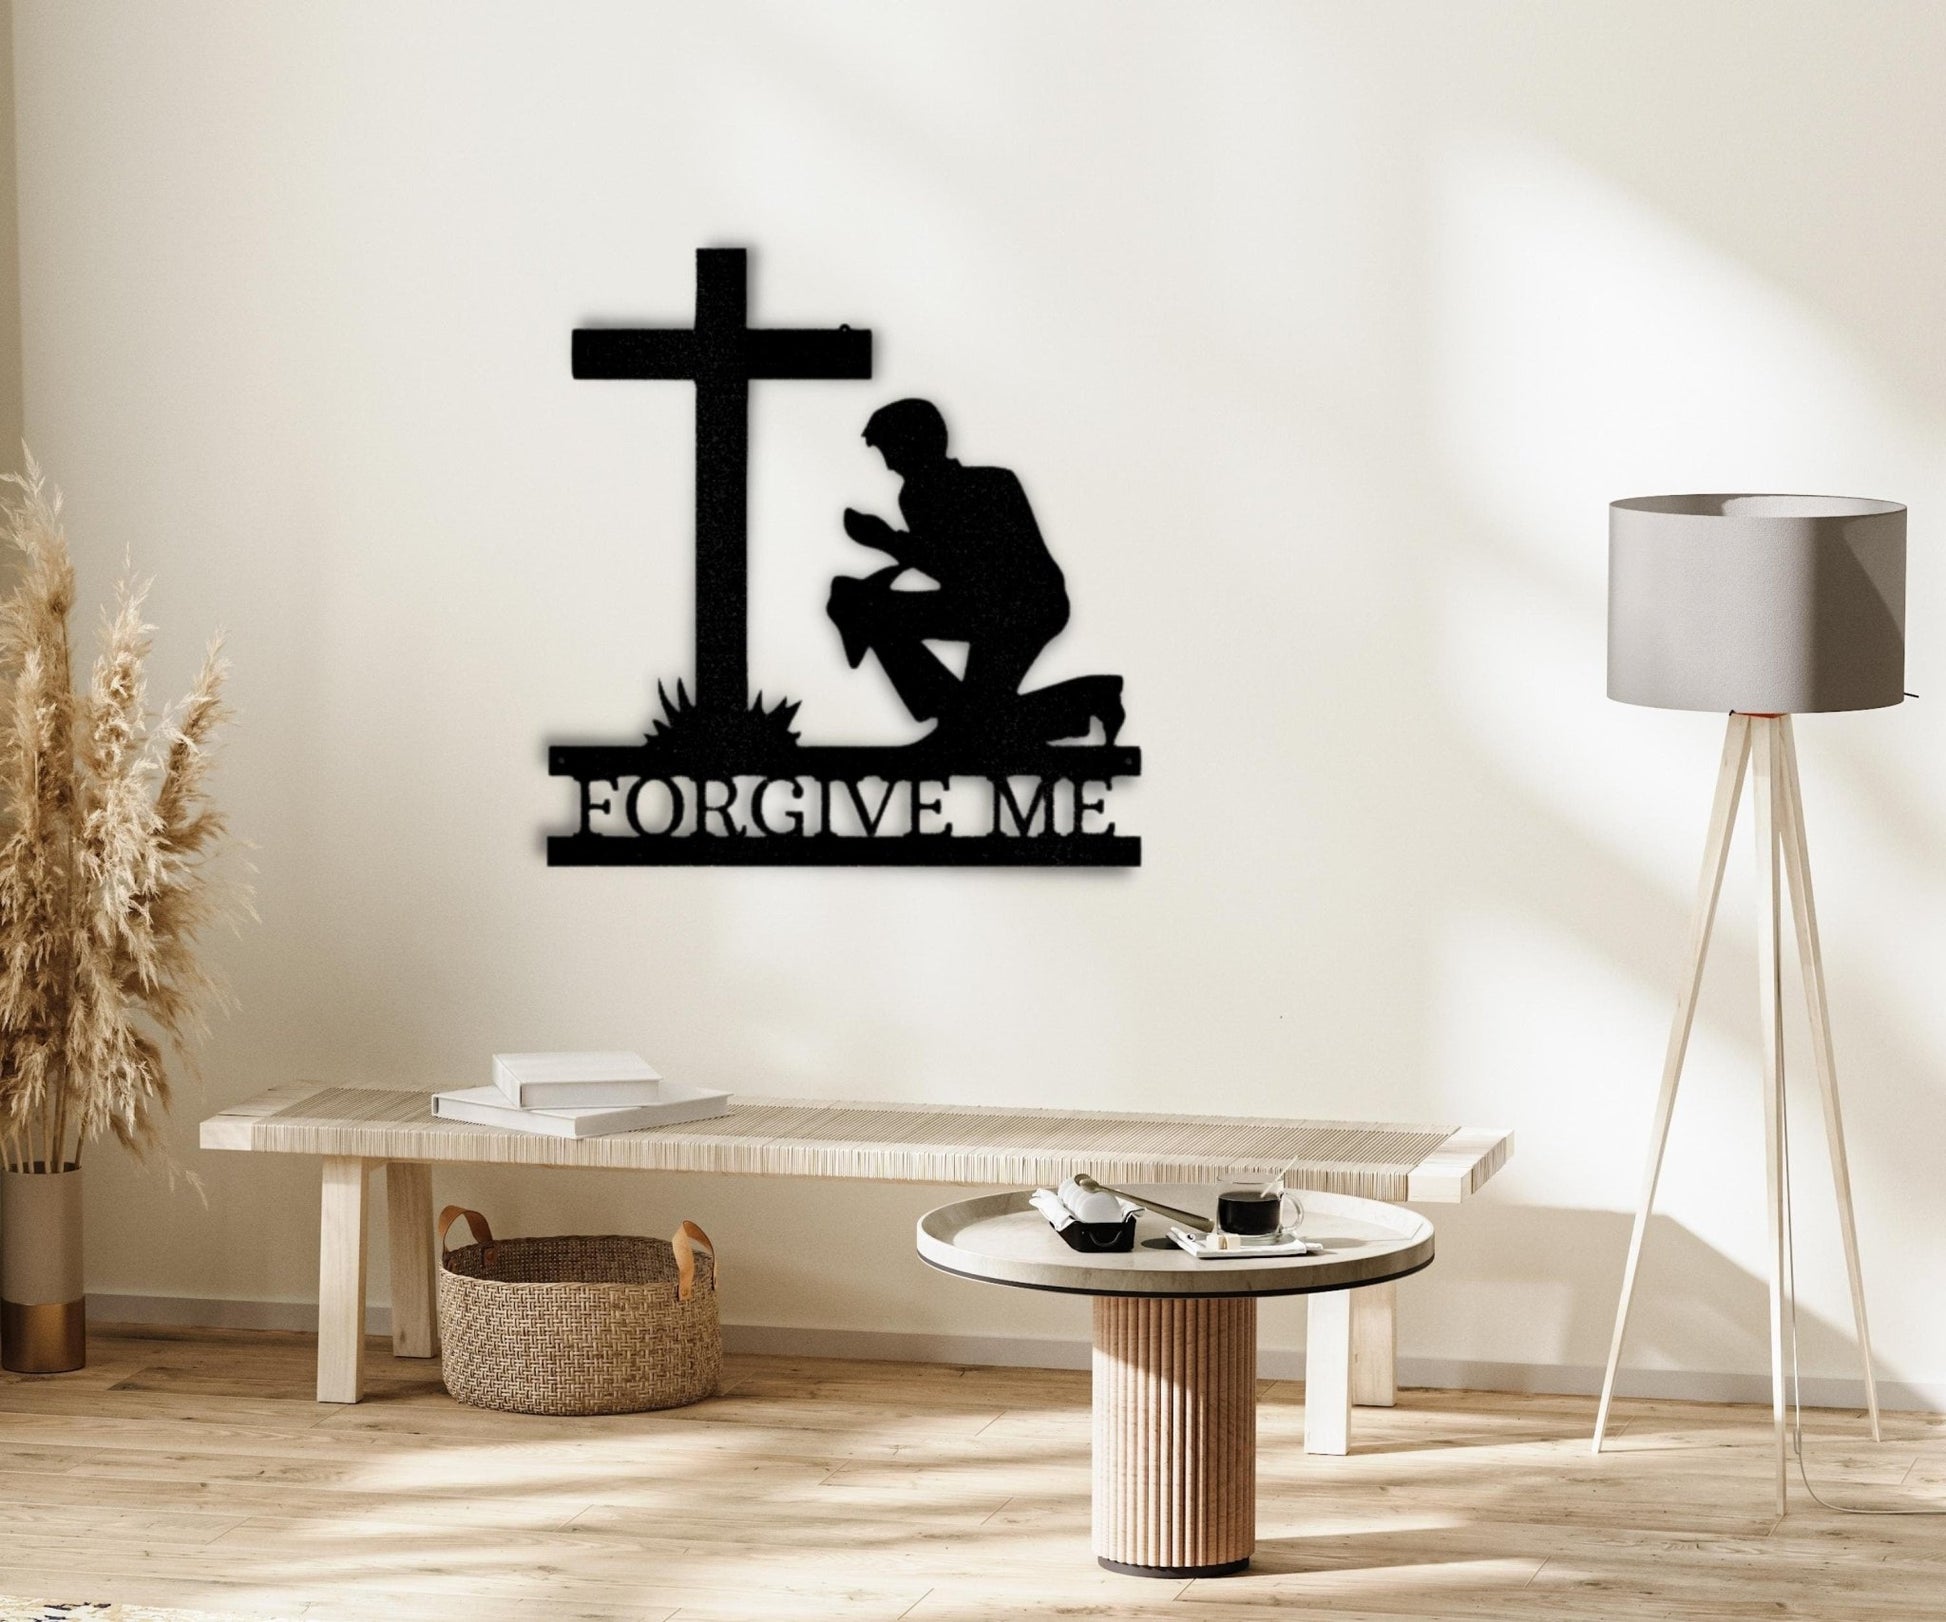 Kneeling Man Wall Sign - Custom Easter Cross Home Decor for Patriotic and Christian Themes - Stylinsoul